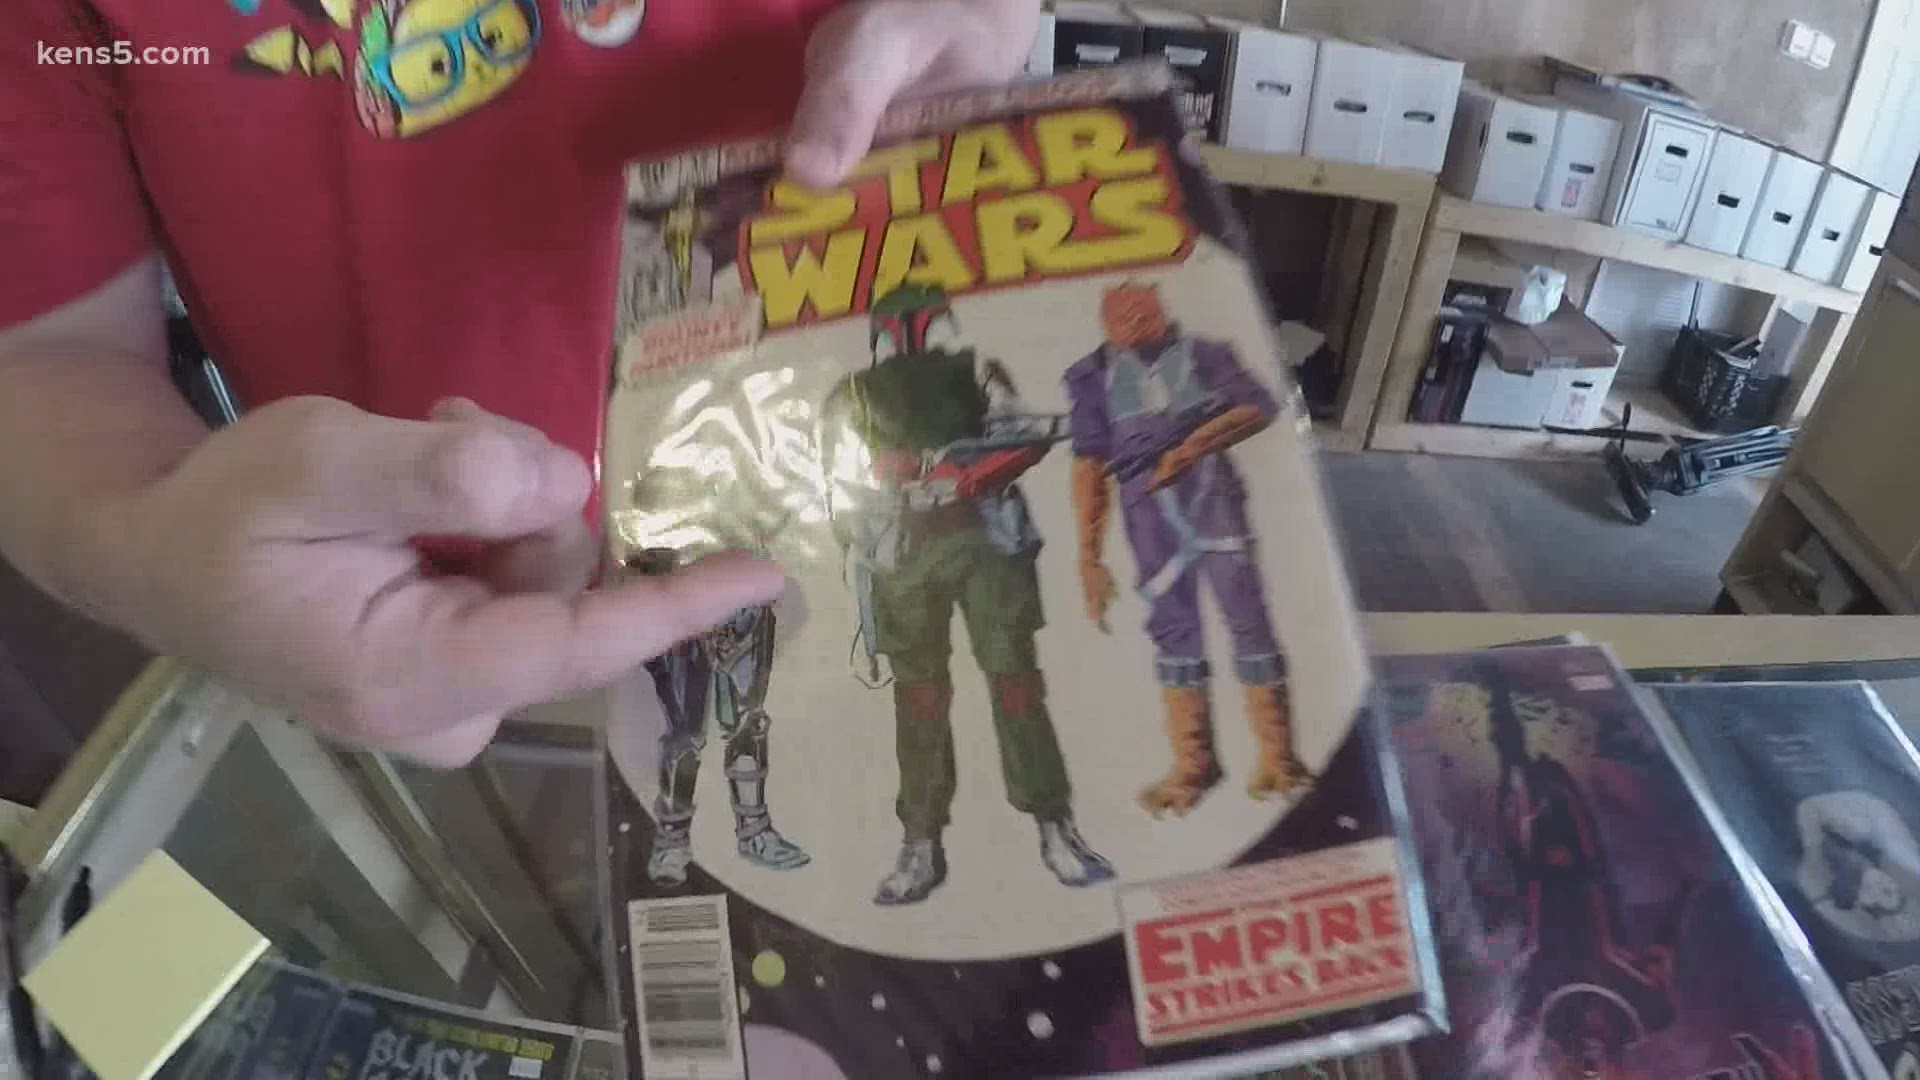 We go inside the Alamo City business where "Star Wars" is much more than a movie franchise.